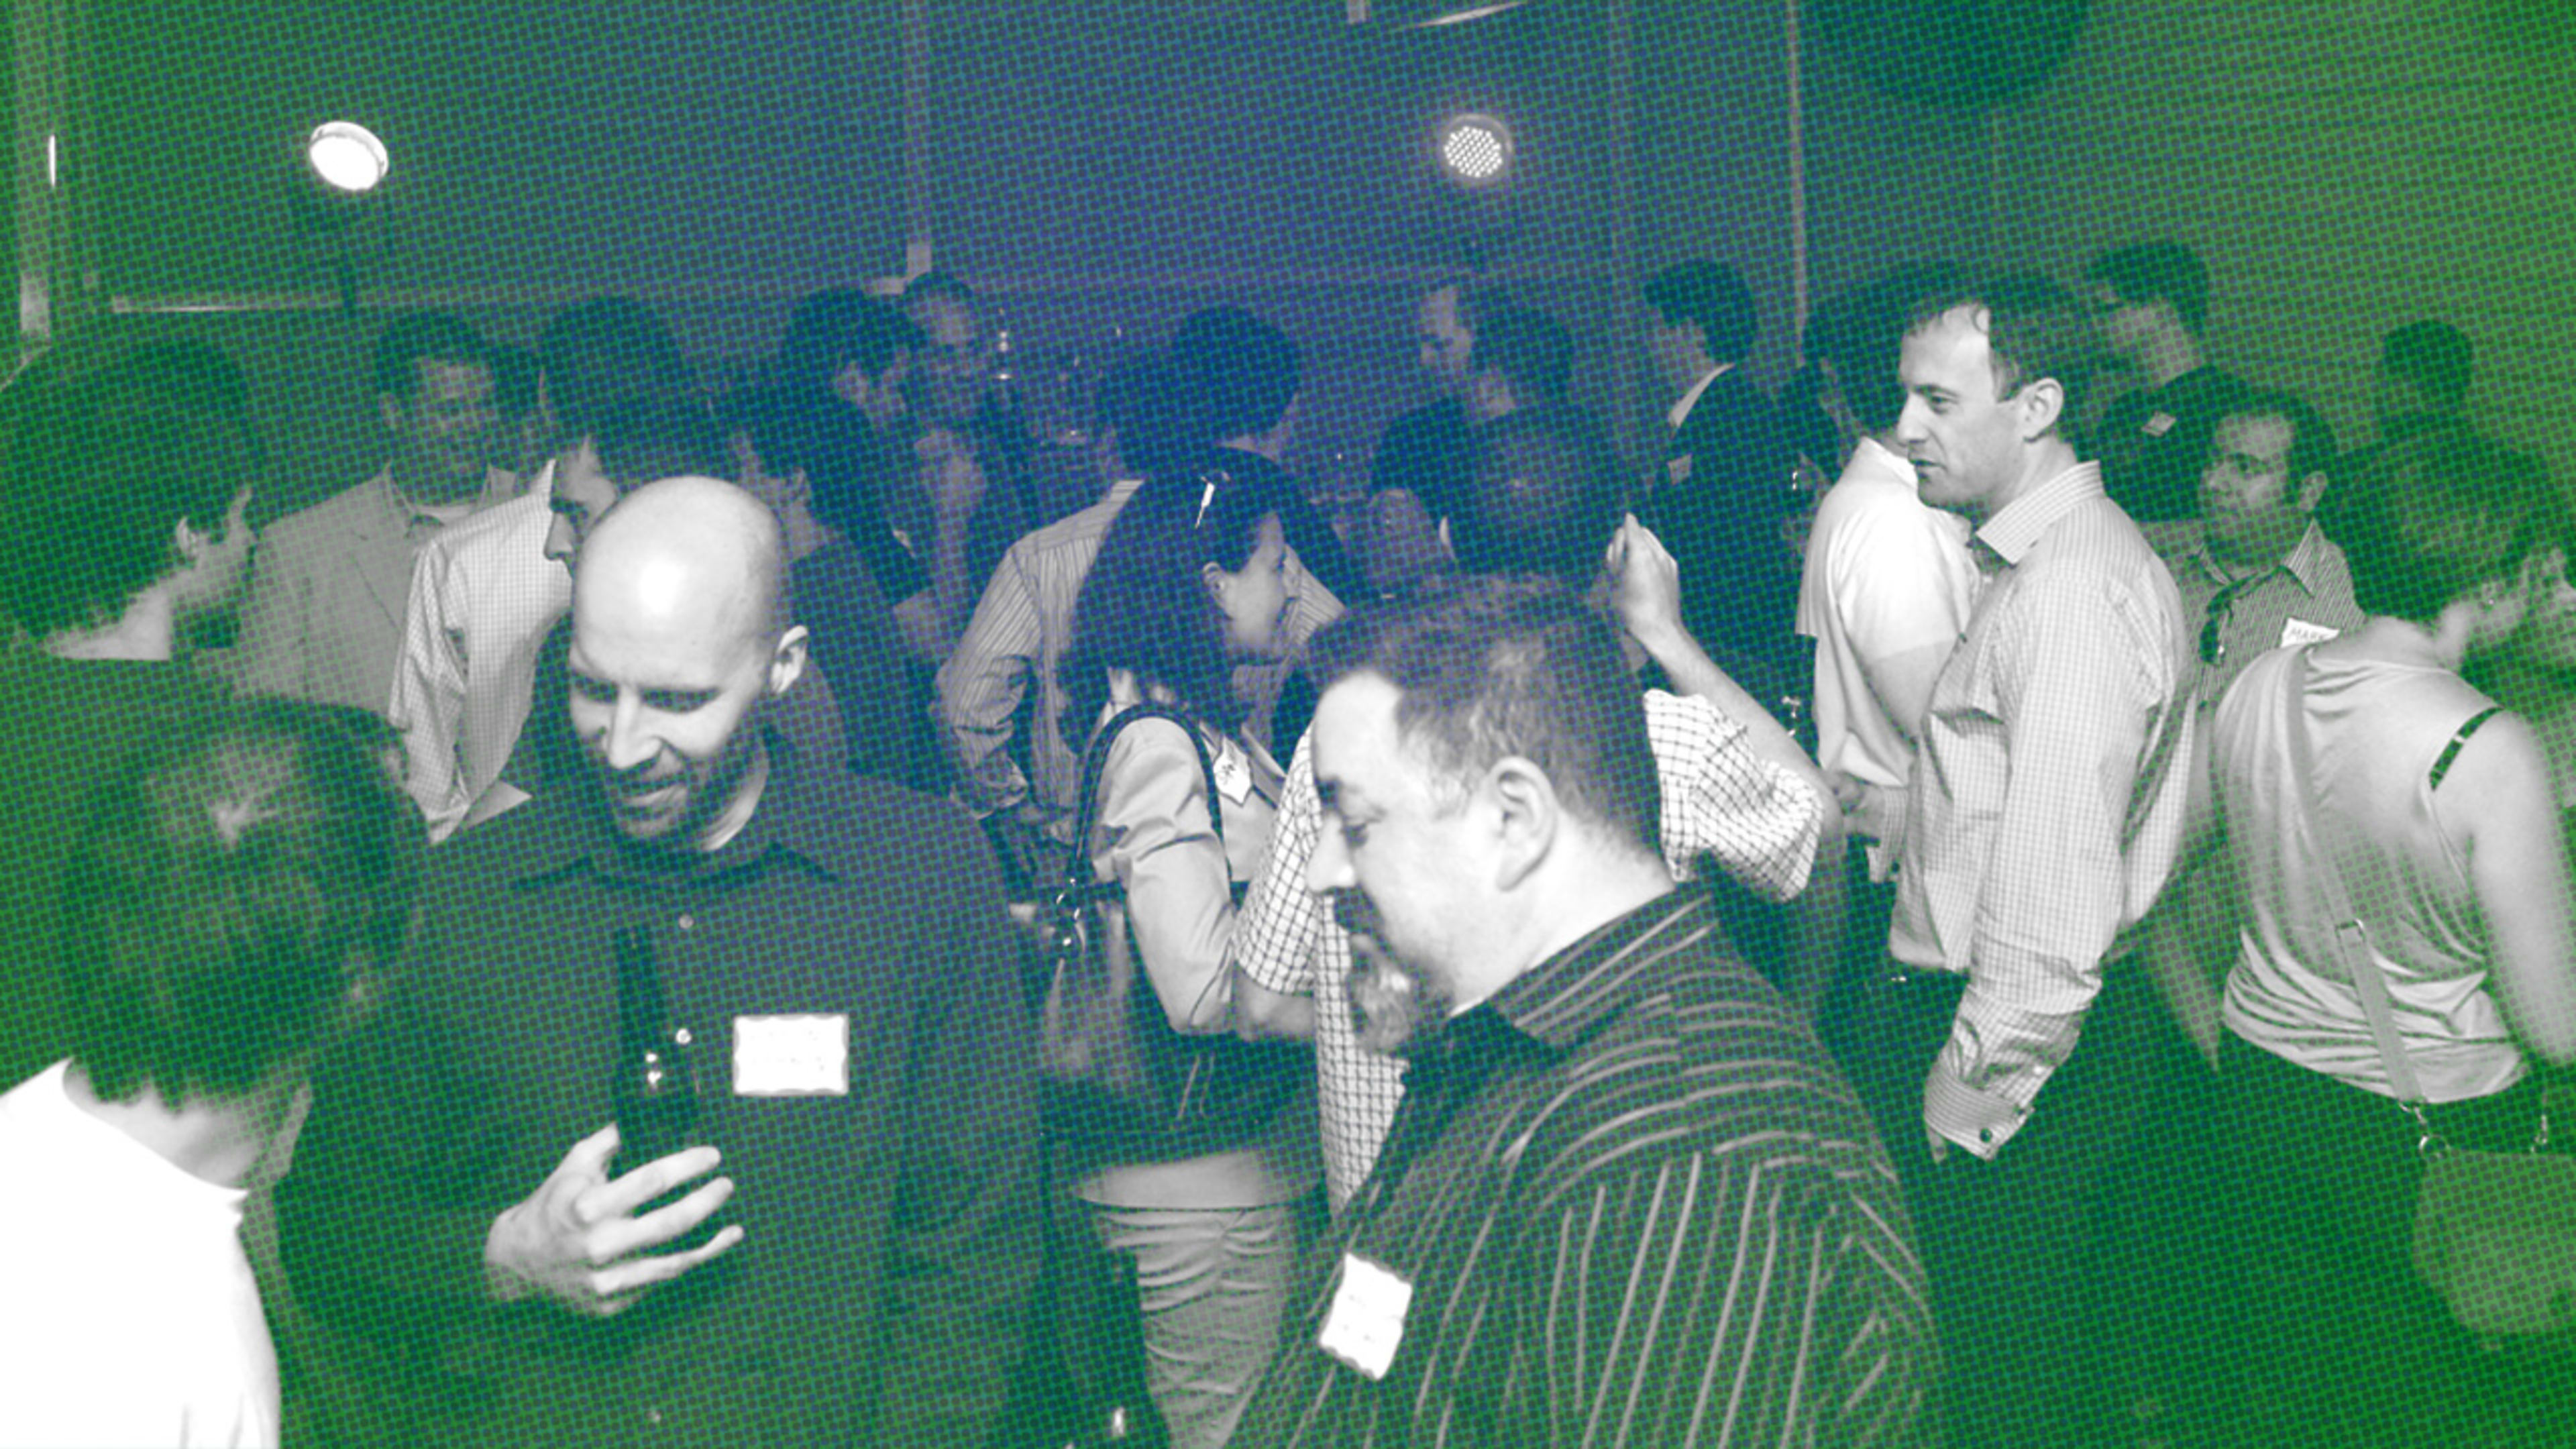 5 Common Misconceptions That Make You Bad At Networking